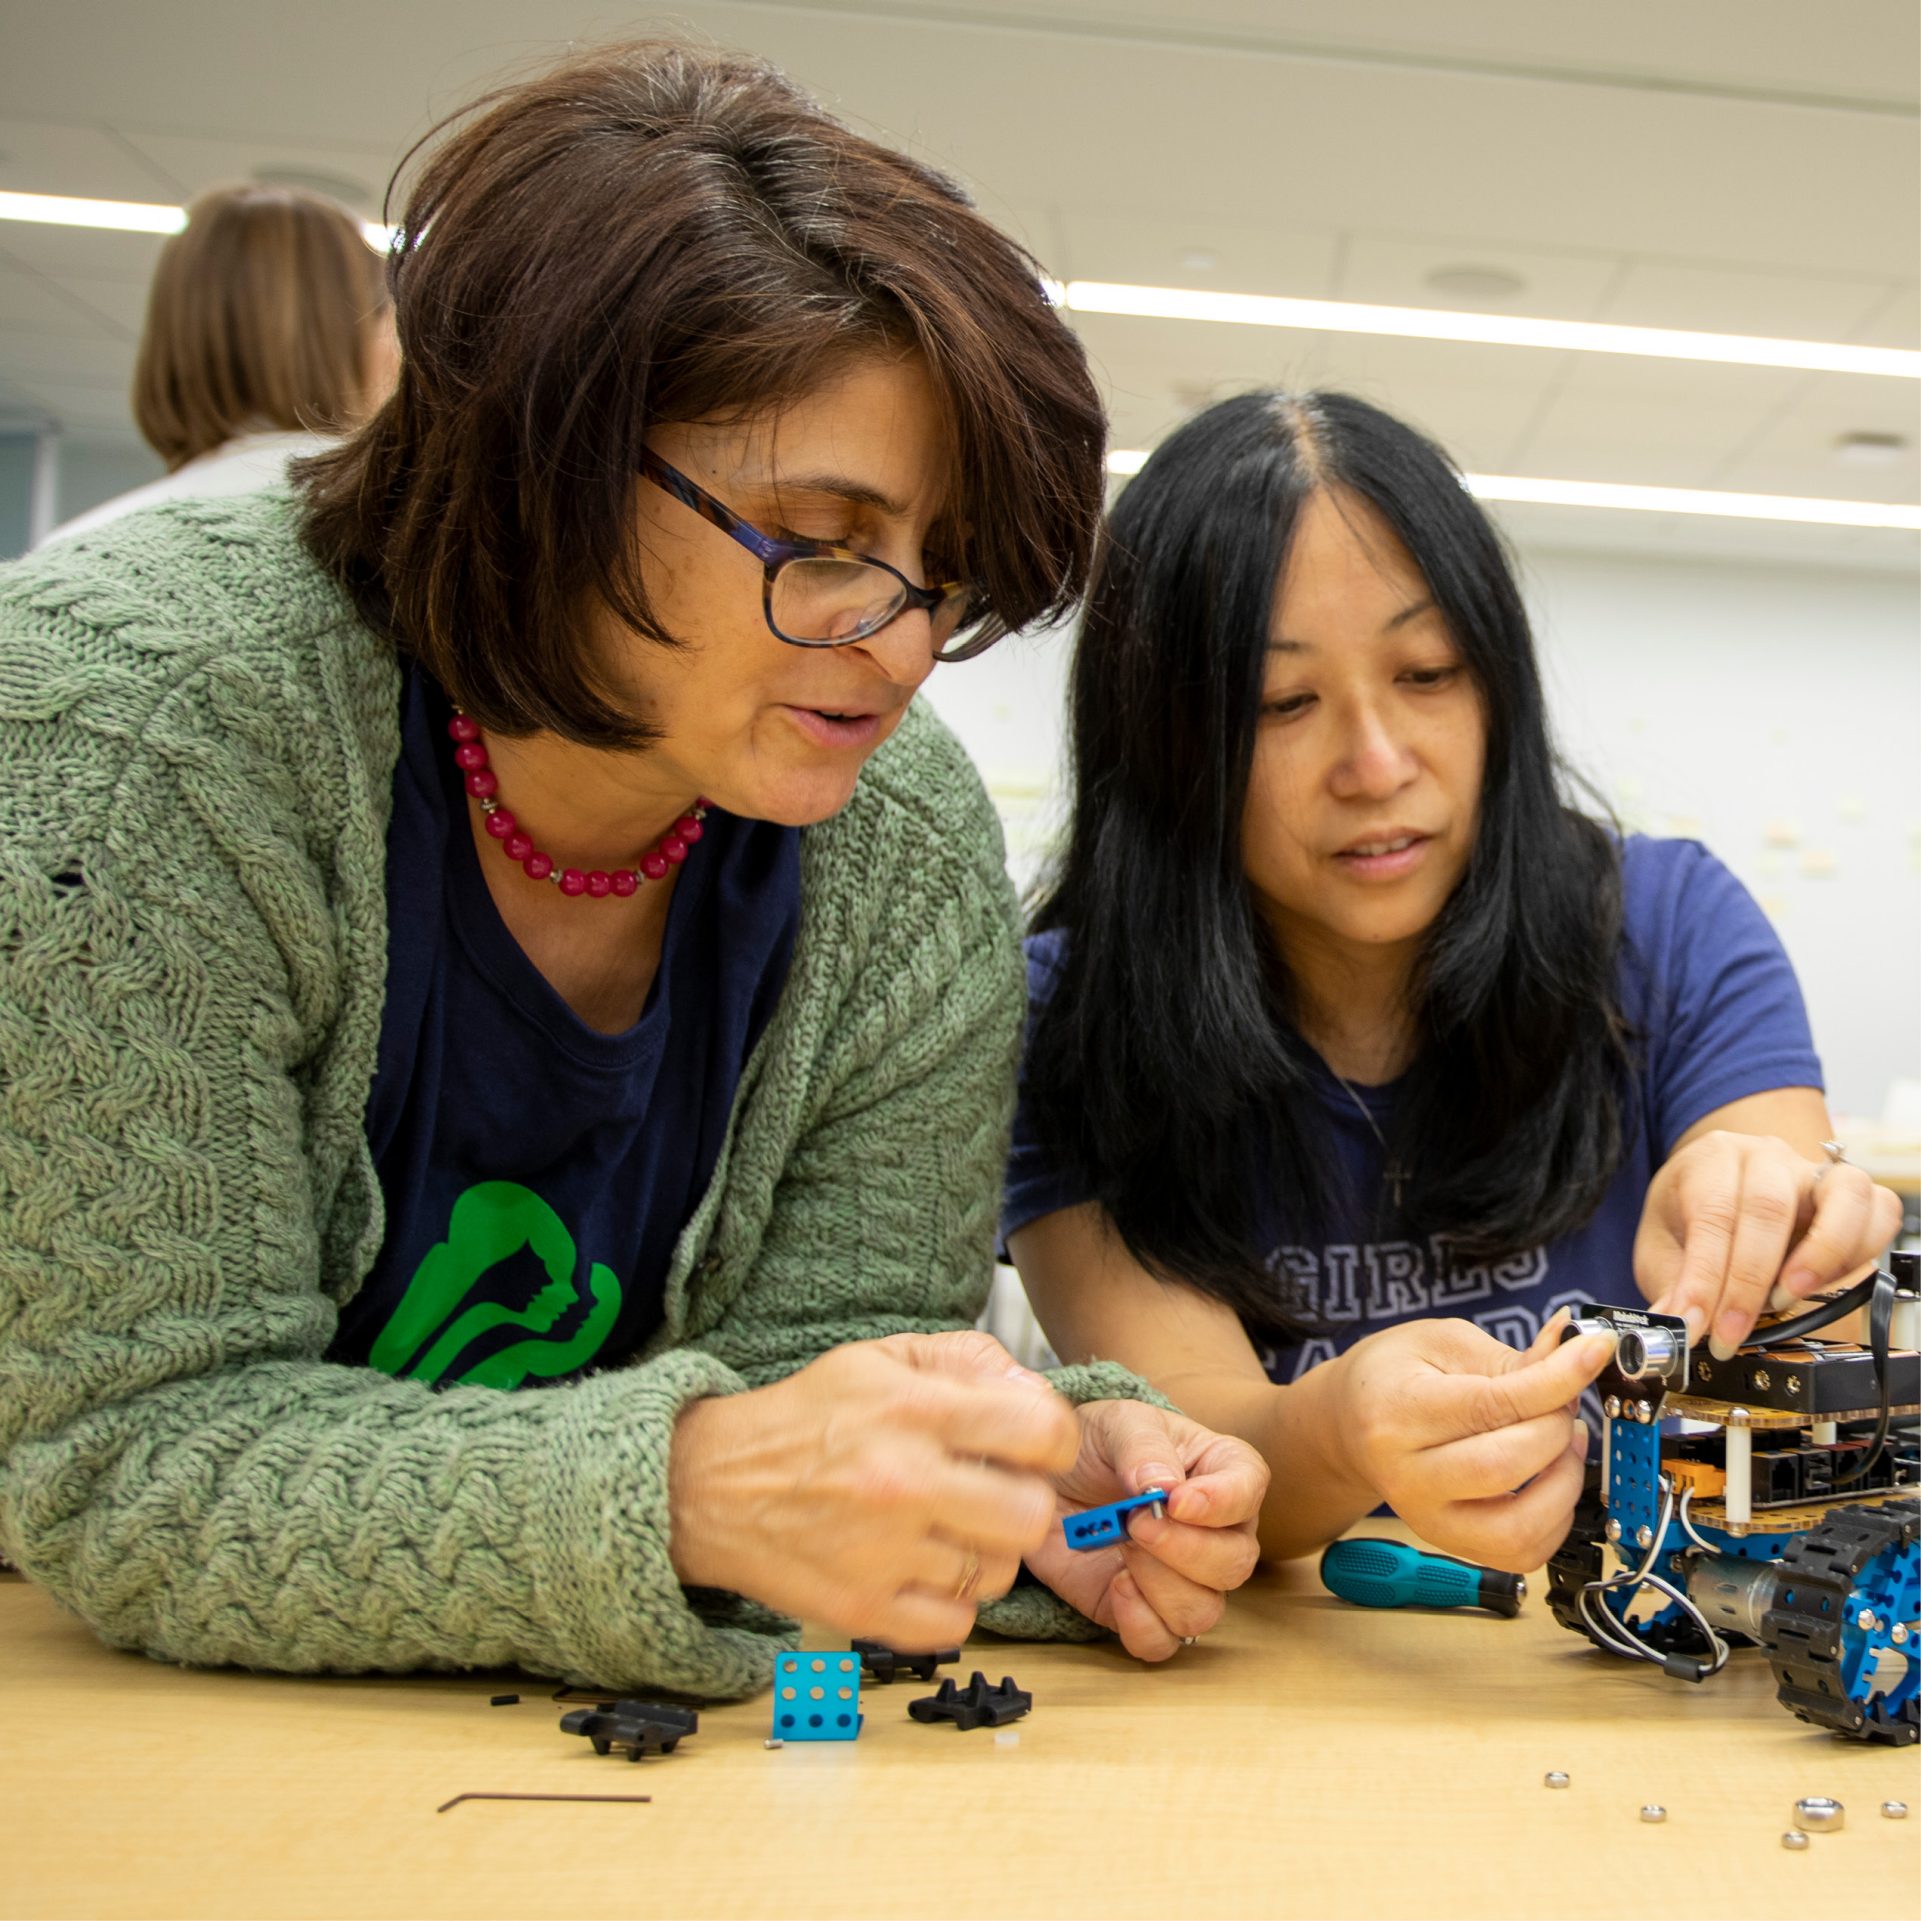 Volunteers working together to build a robot